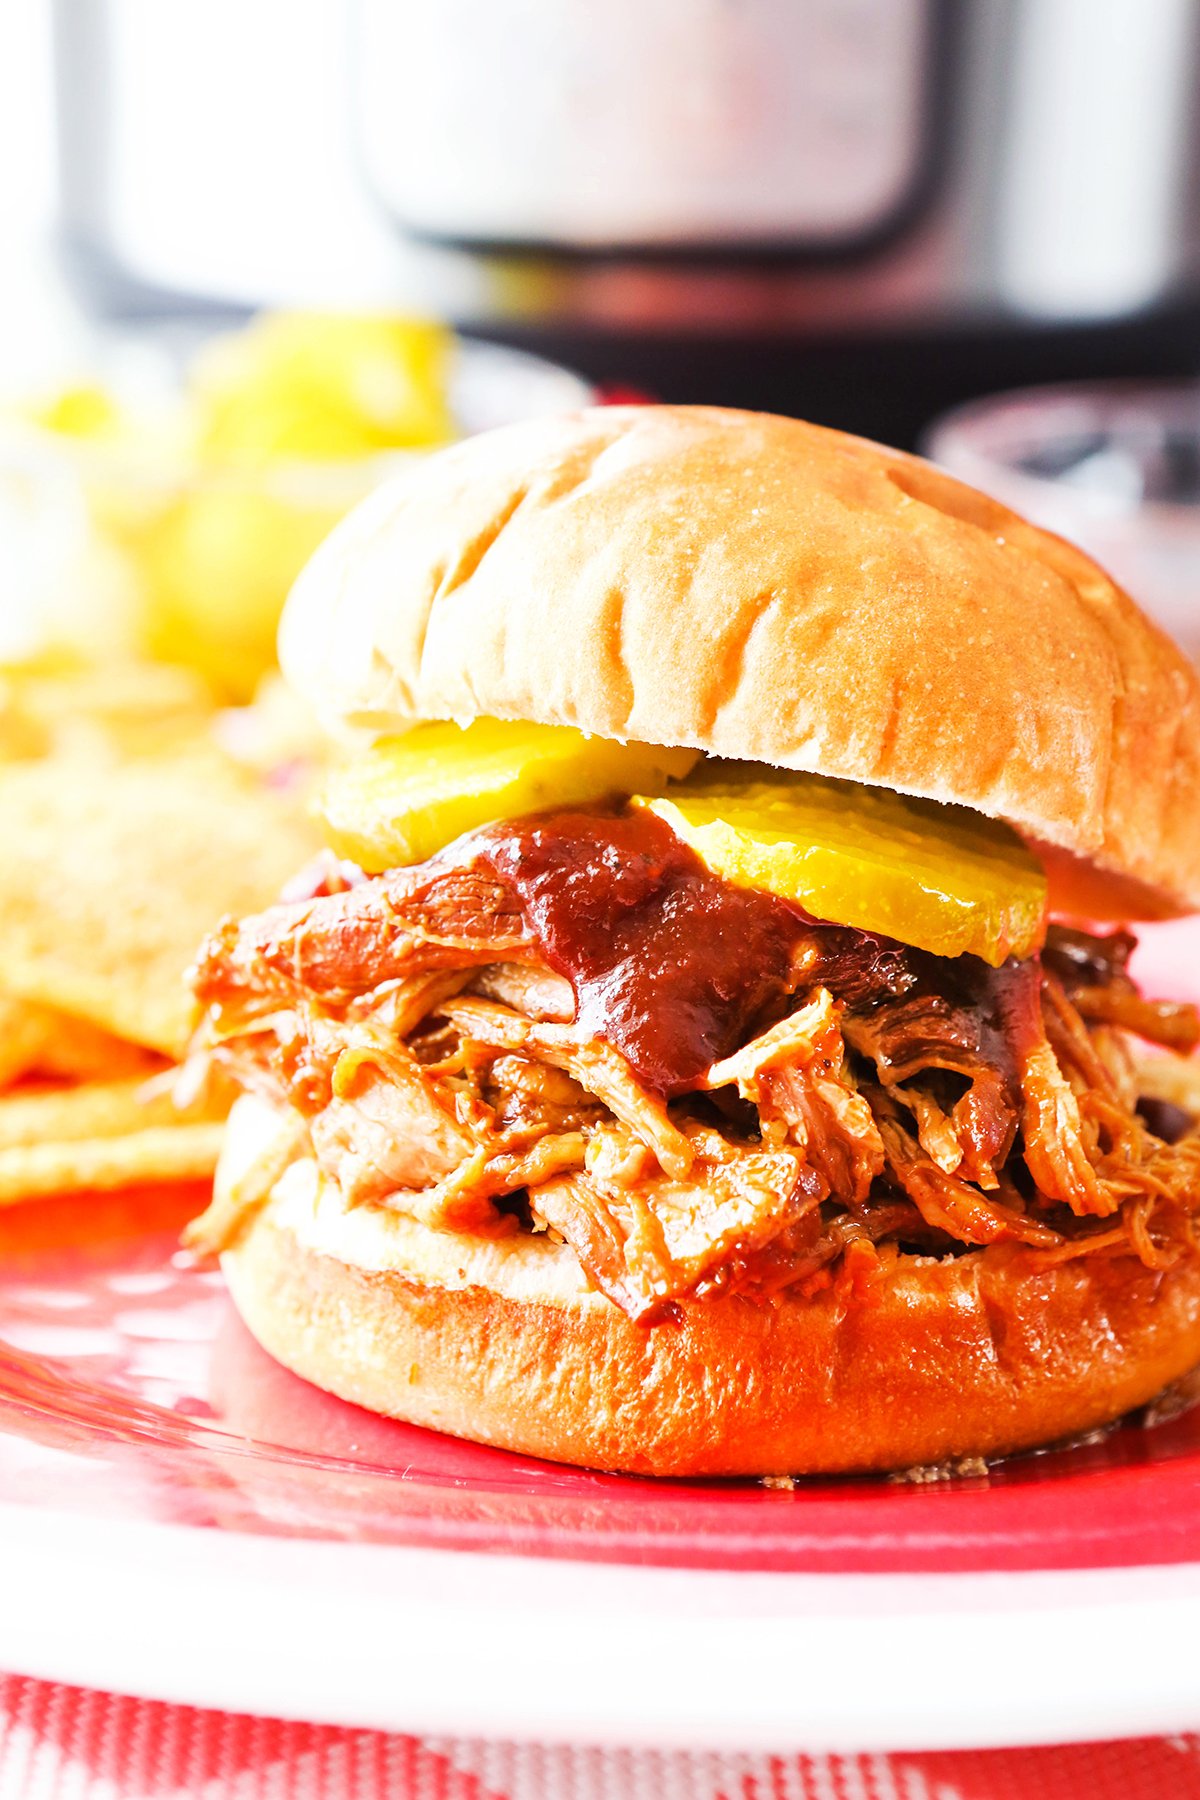 Pulled pork sandwich with sauce dripping over sides.